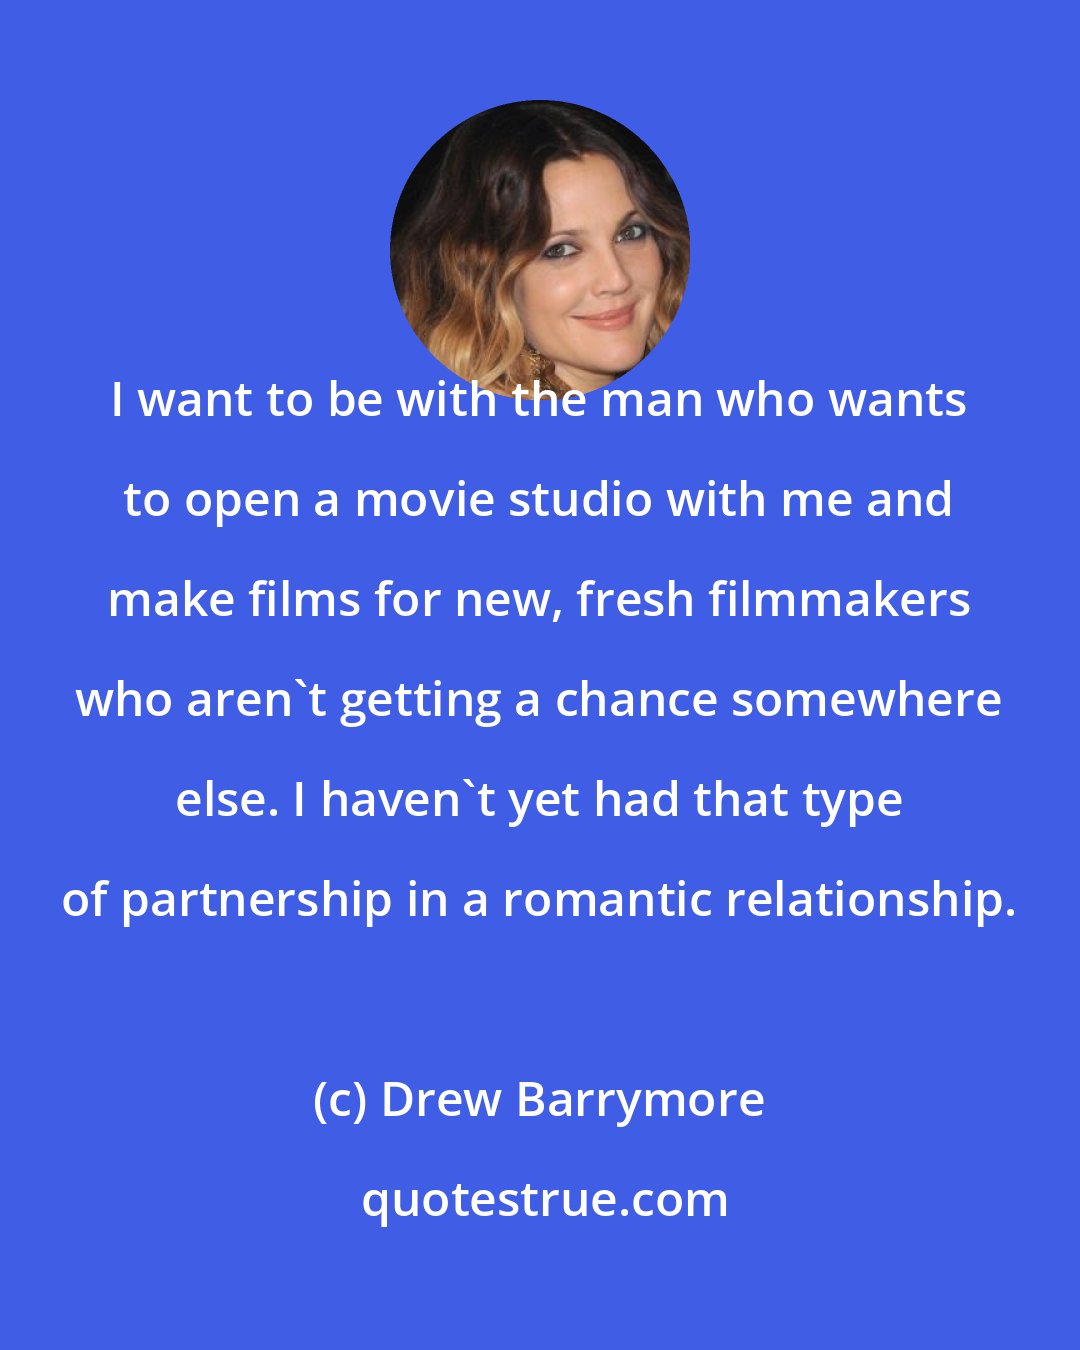 Drew Barrymore: I want to be with the man who wants to open a movie studio with me and make films for new, fresh filmmakers who aren't getting a chance somewhere else. I haven't yet had that type of partnership in a romantic relationship.